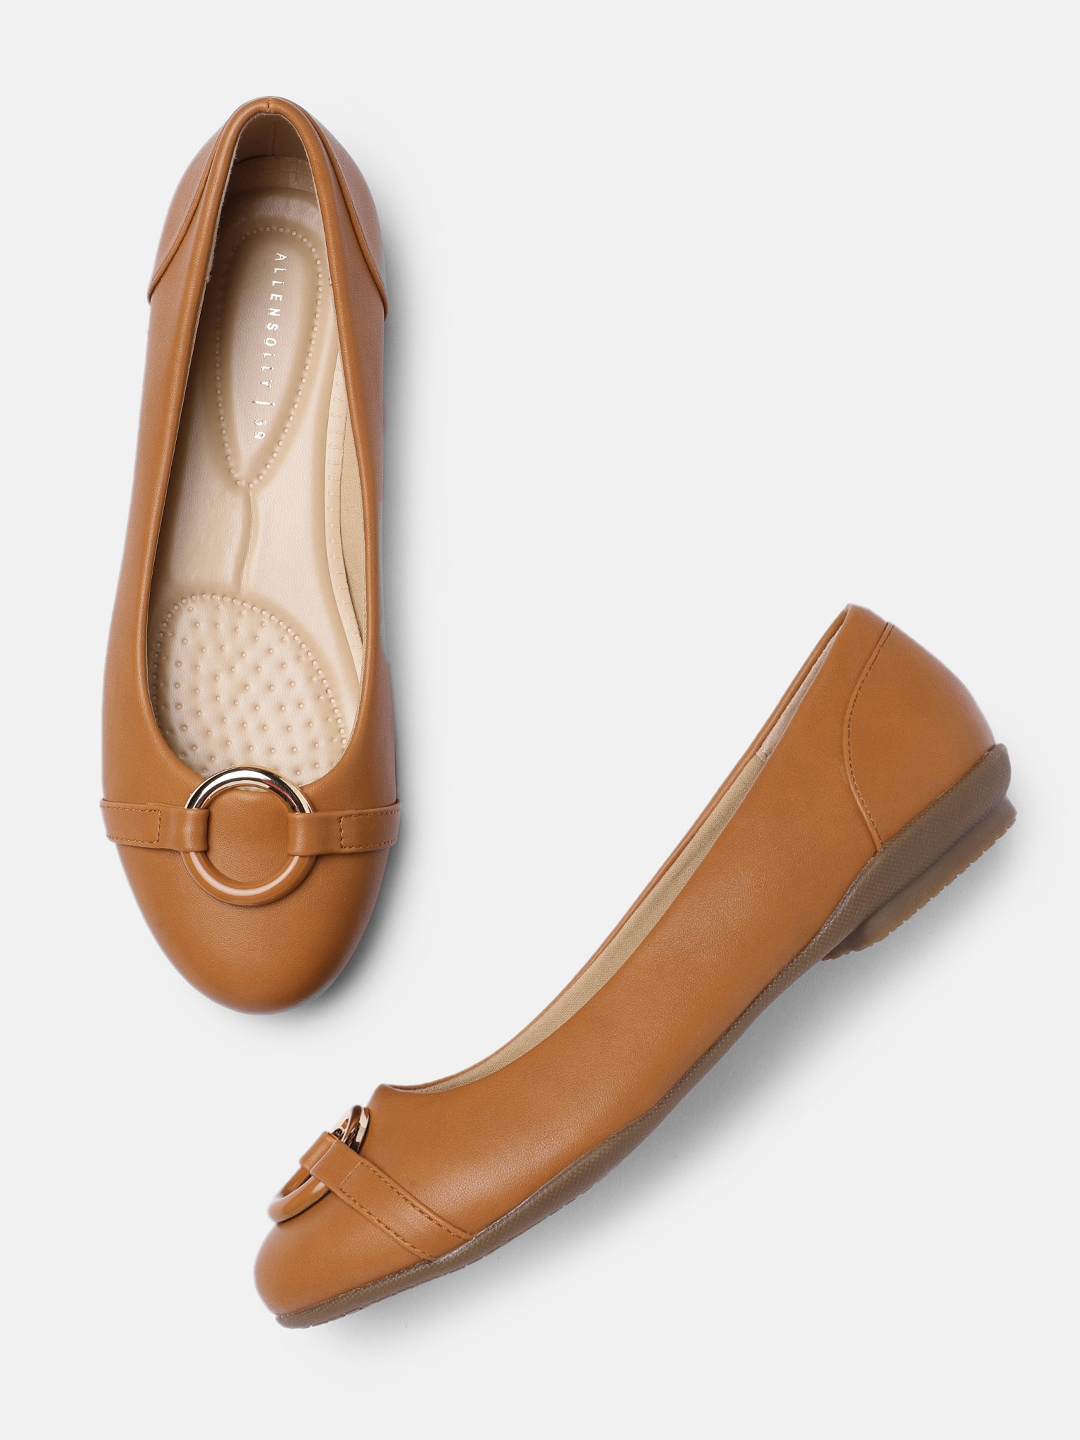 Allen Solly Women Tan Solid Casual Ballerinas with Semi-Metallic Detail Flats Price in India